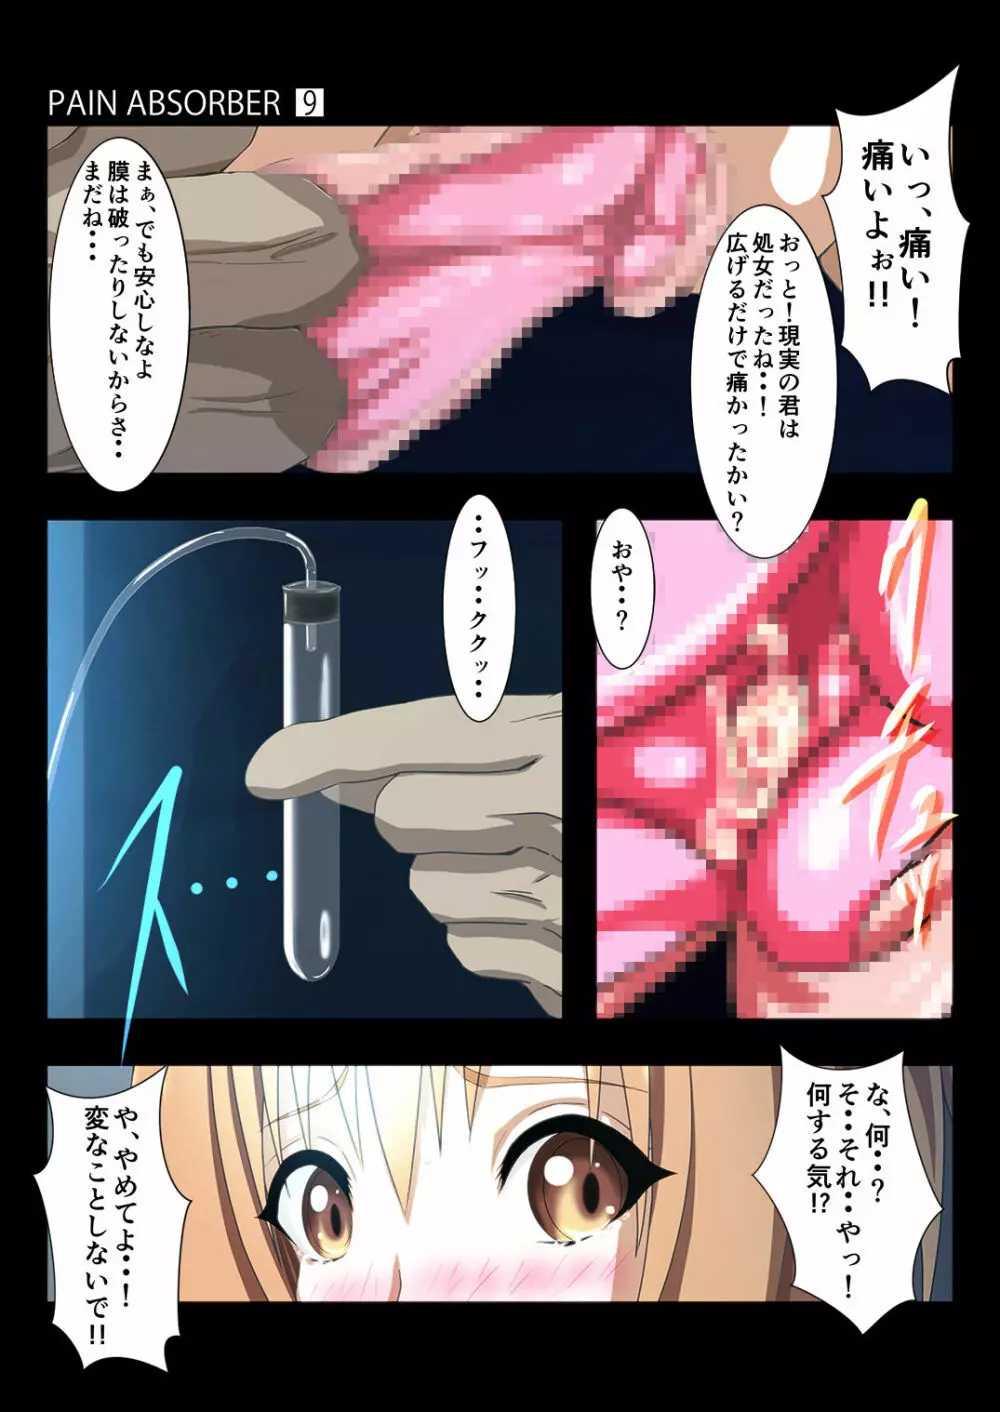 PAIN ABSORBER Episode.9 35ページ